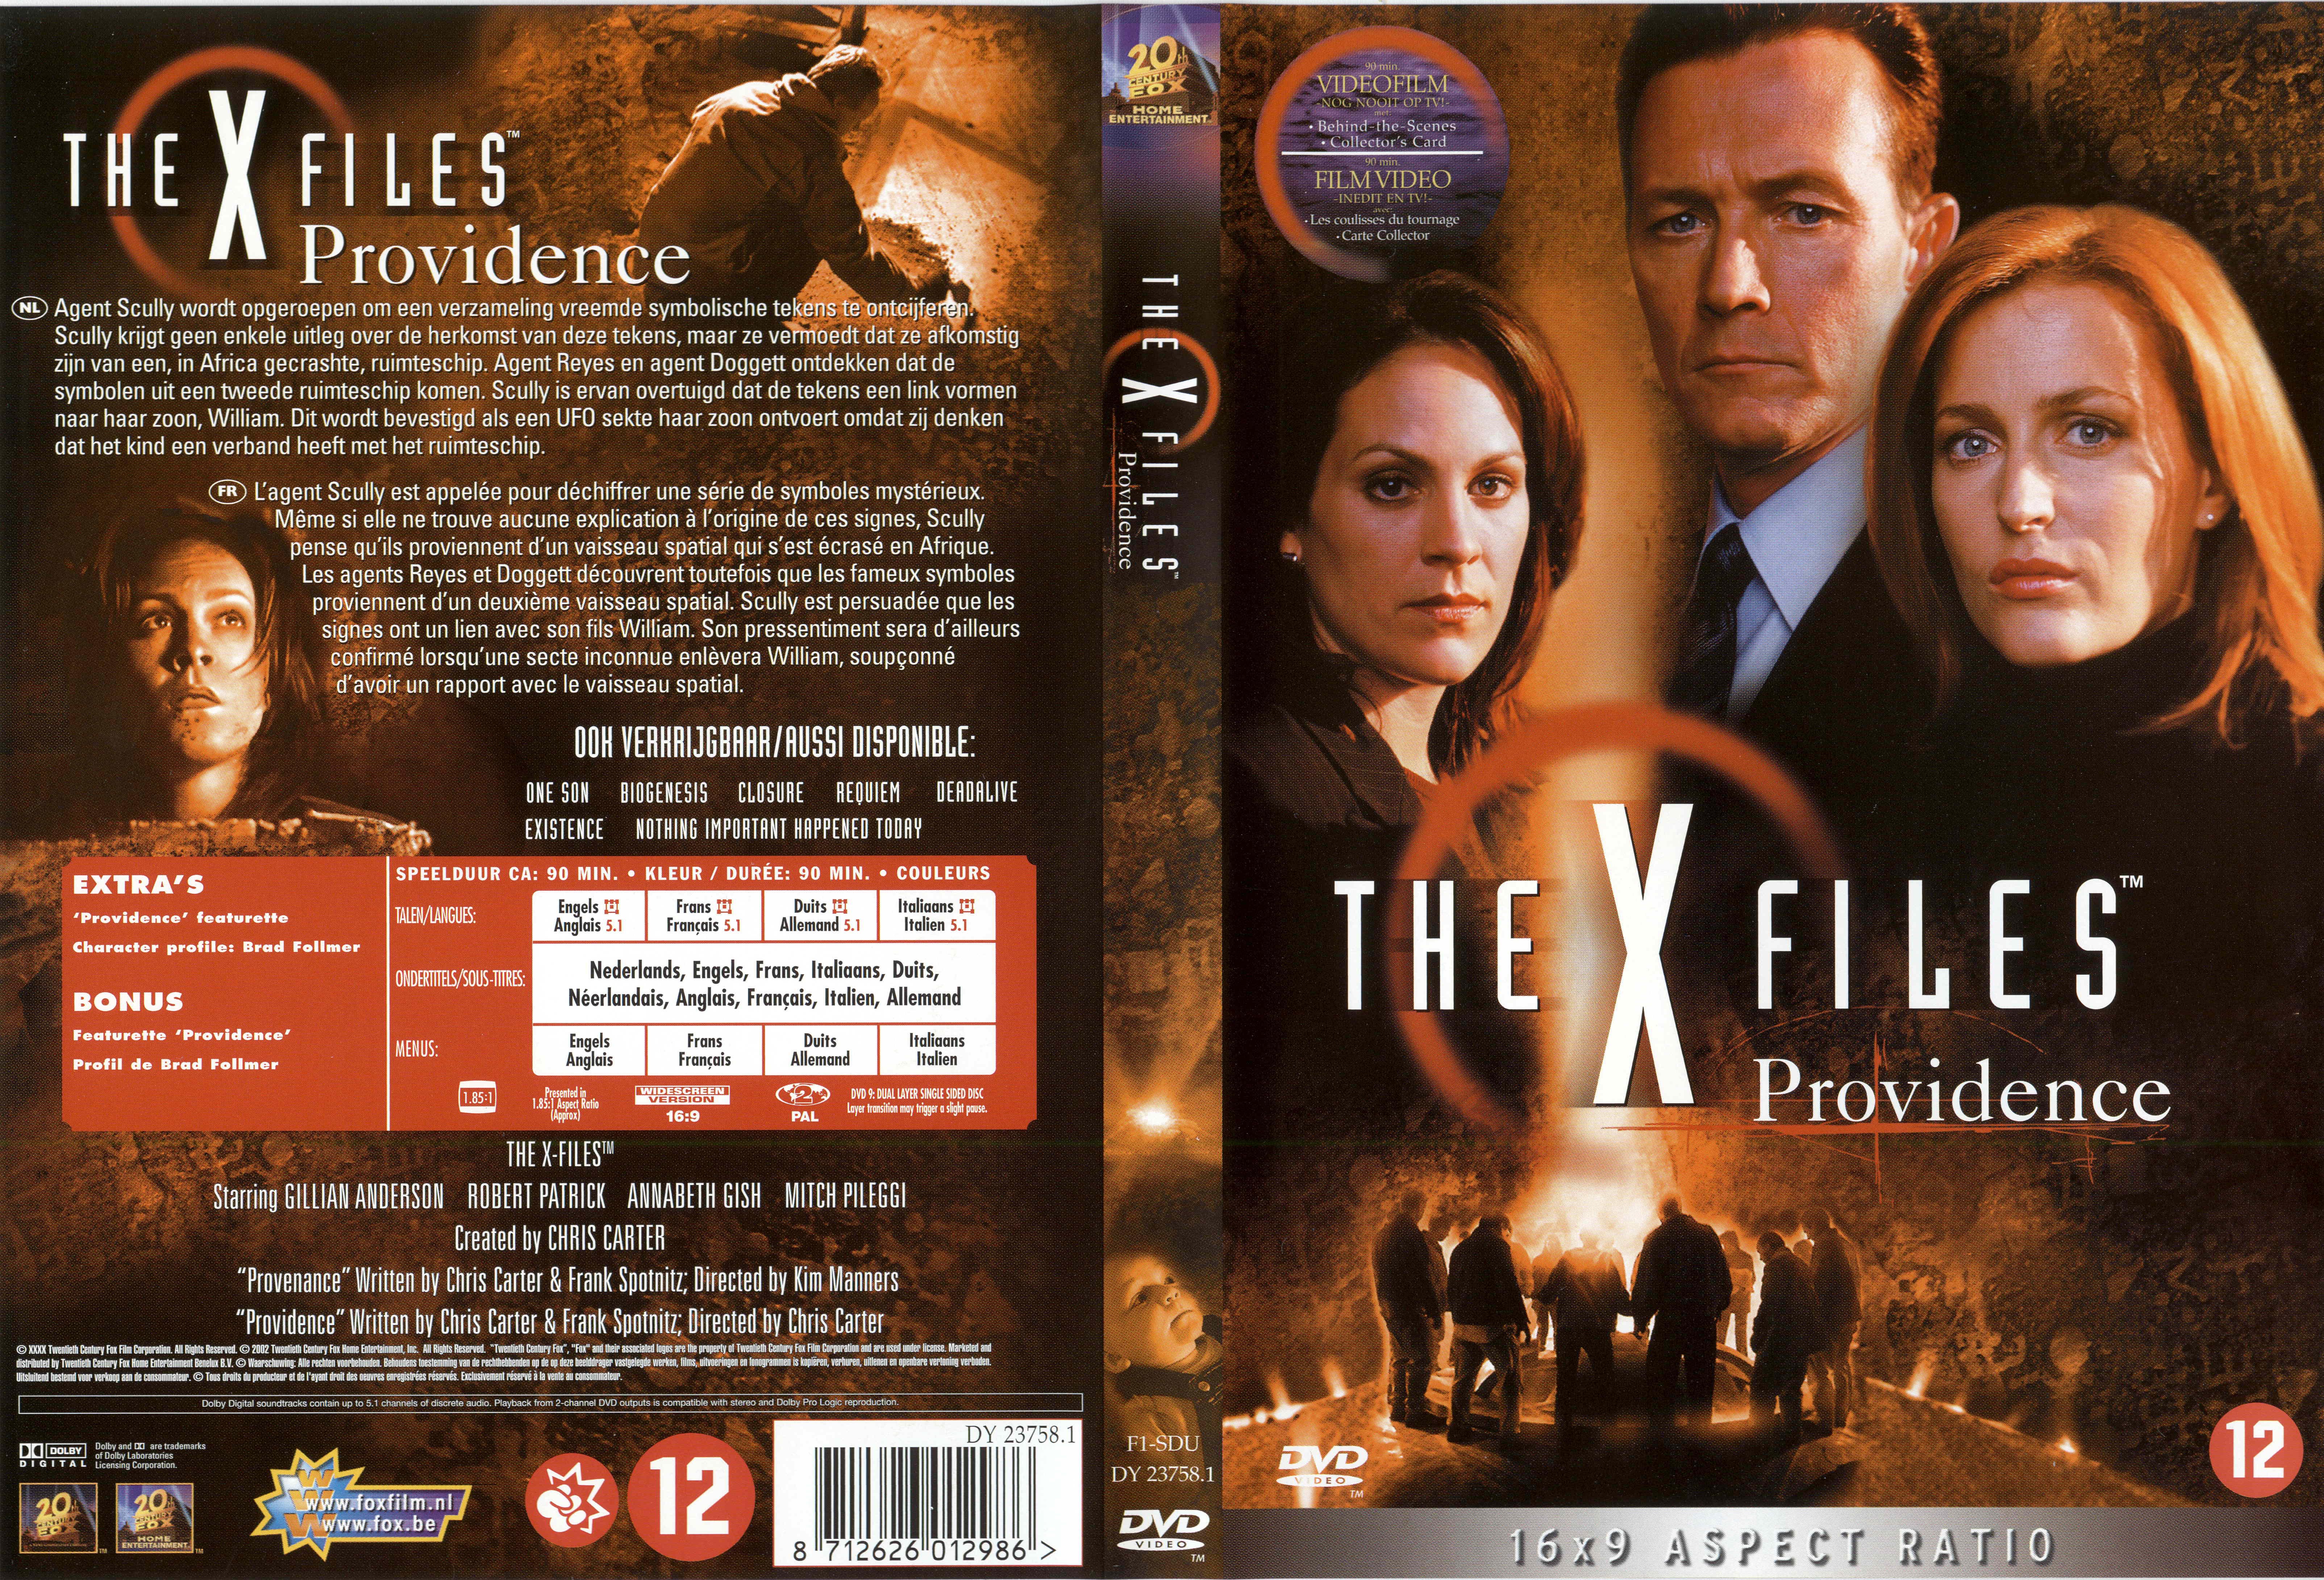 Jaquette DVD X files providence v2